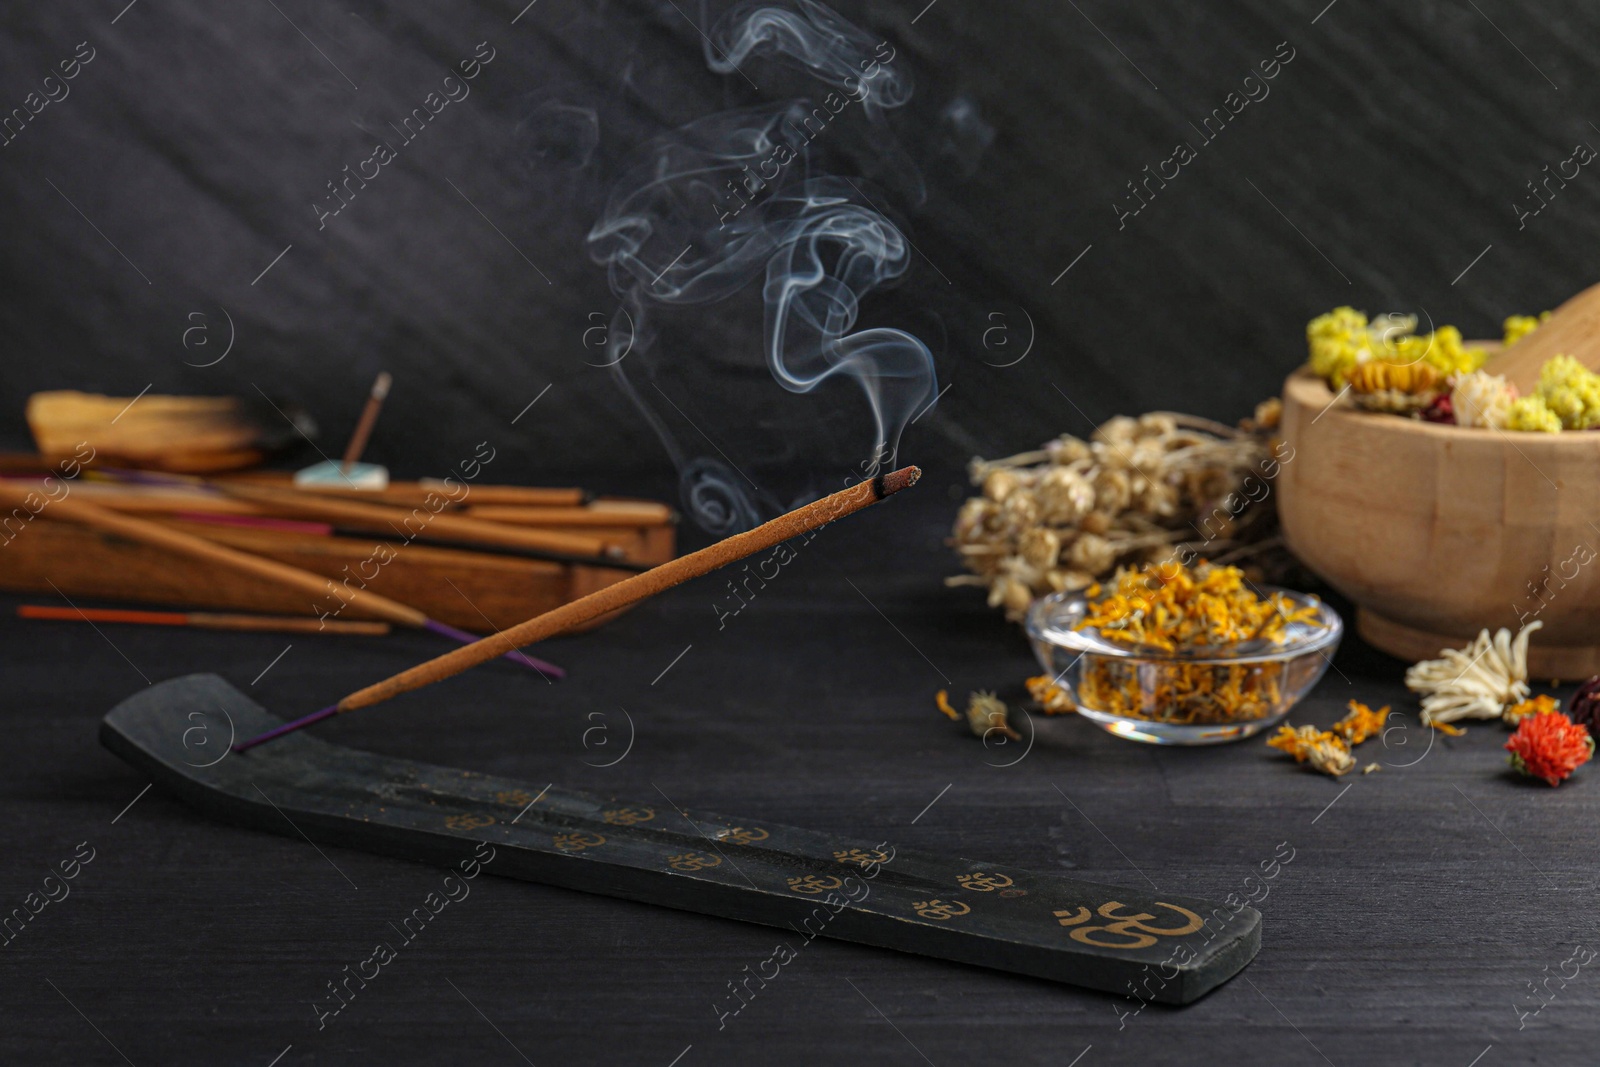 Photo of Aromatic incense stick smoldering in holder with om sign on black table